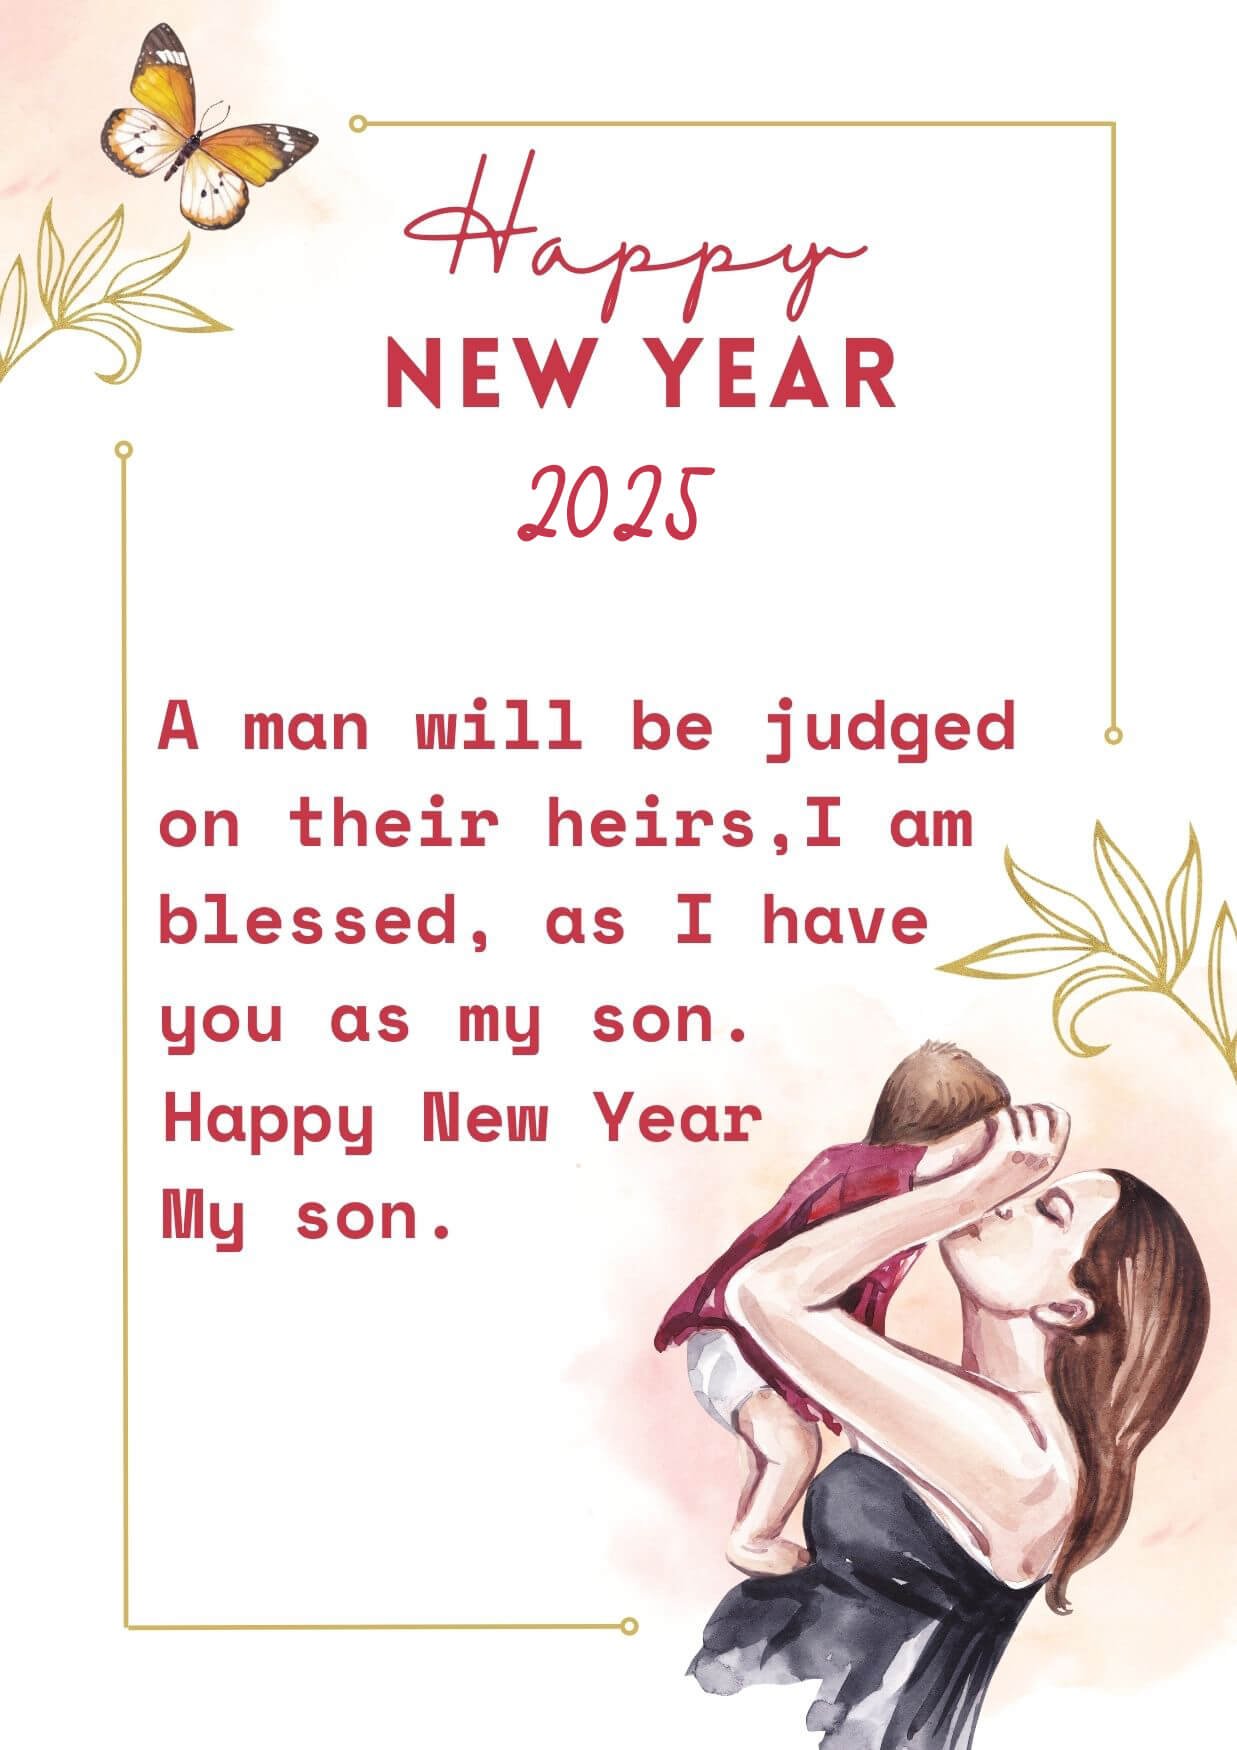 2025 Happy New Year Wishes From Mother To Son